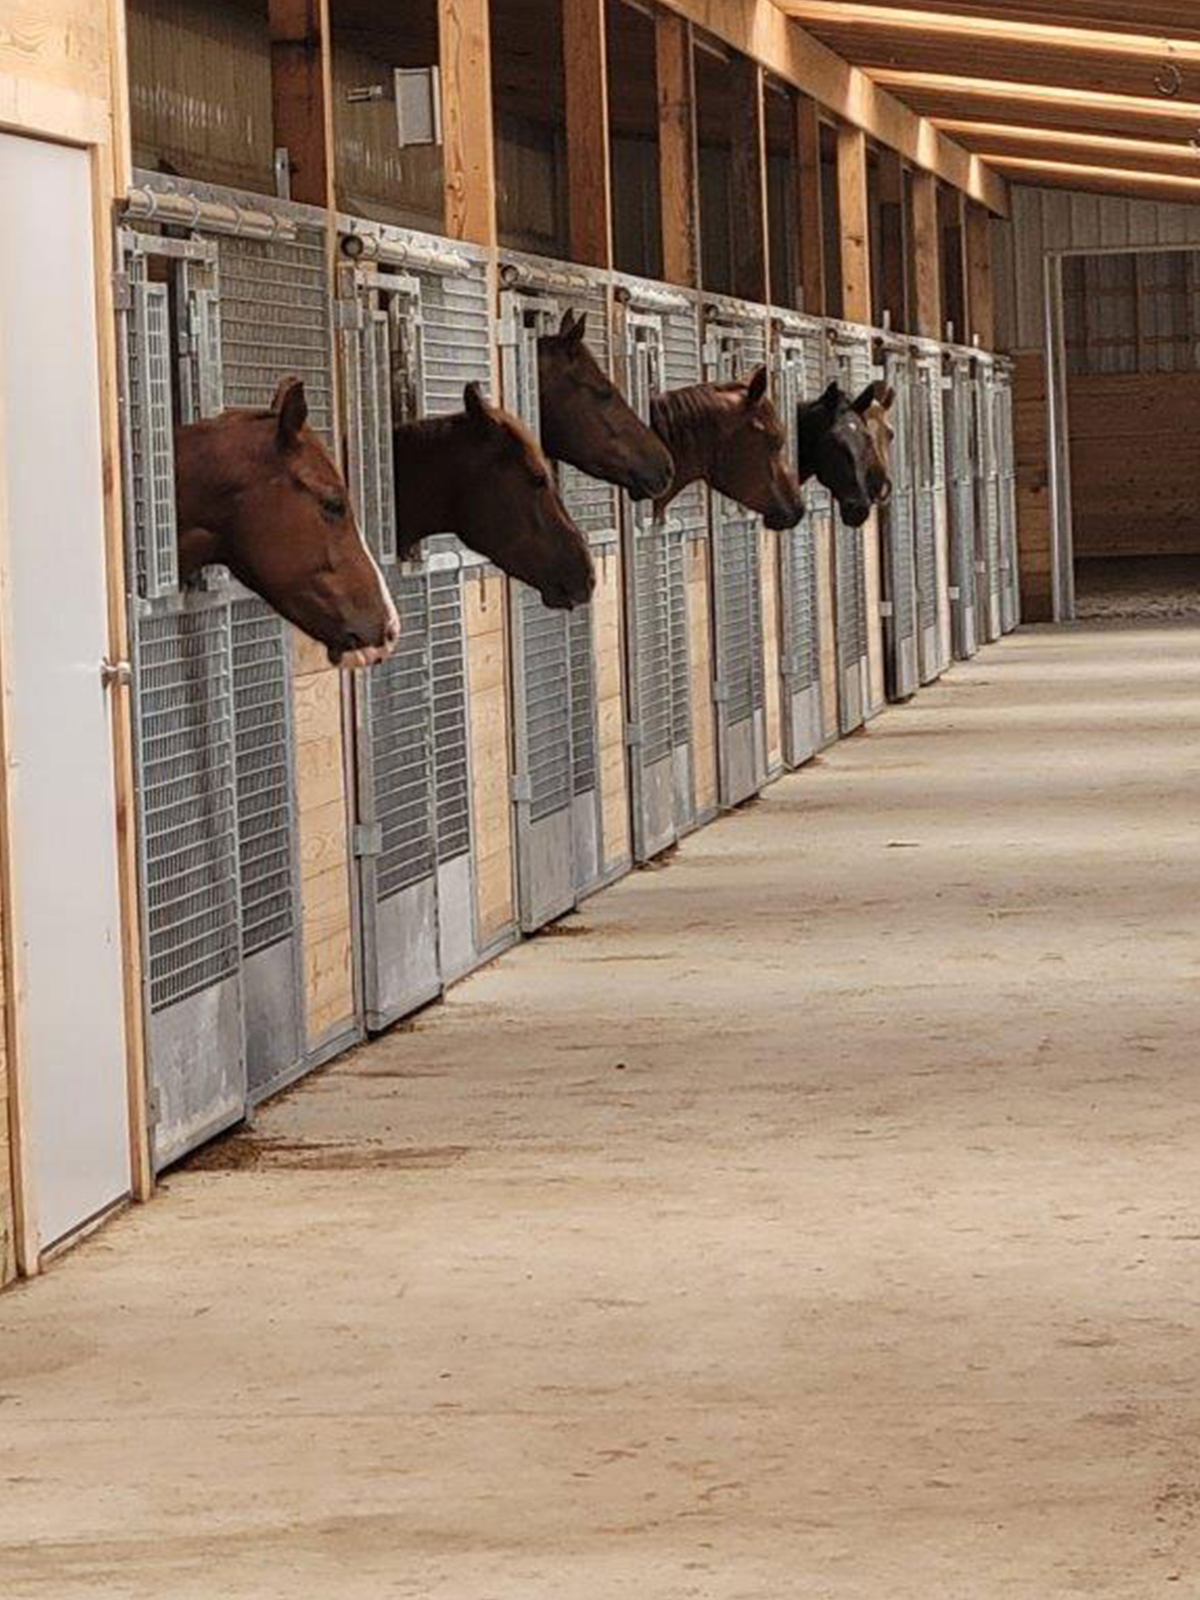 Multiple mesh stalls in a row with horses sticking their heads out